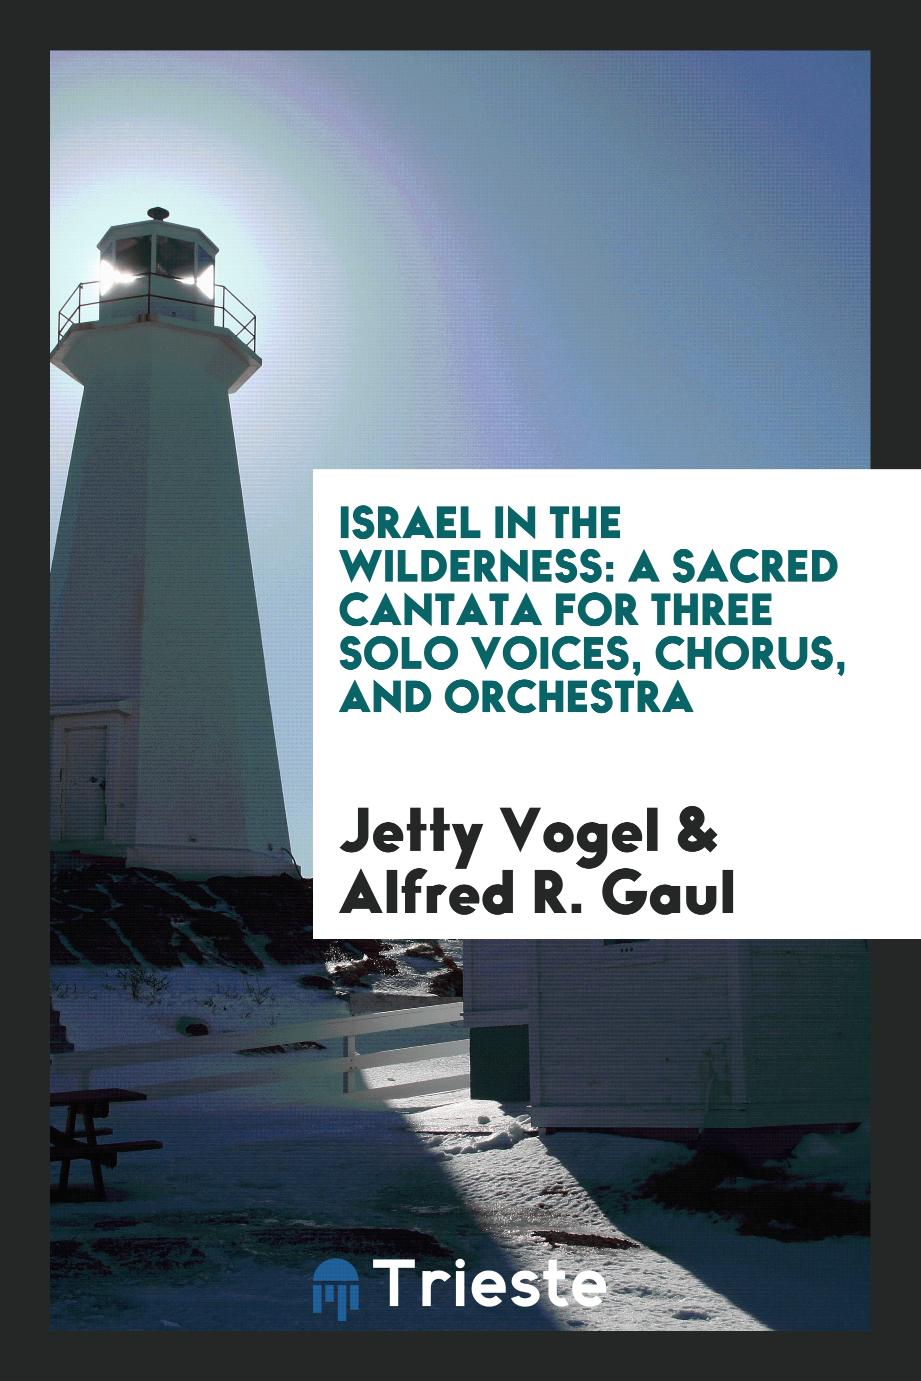 Israel in the Wilderness: A Sacred Cantata for Three Solo Voices, Chorus, and Orchestra